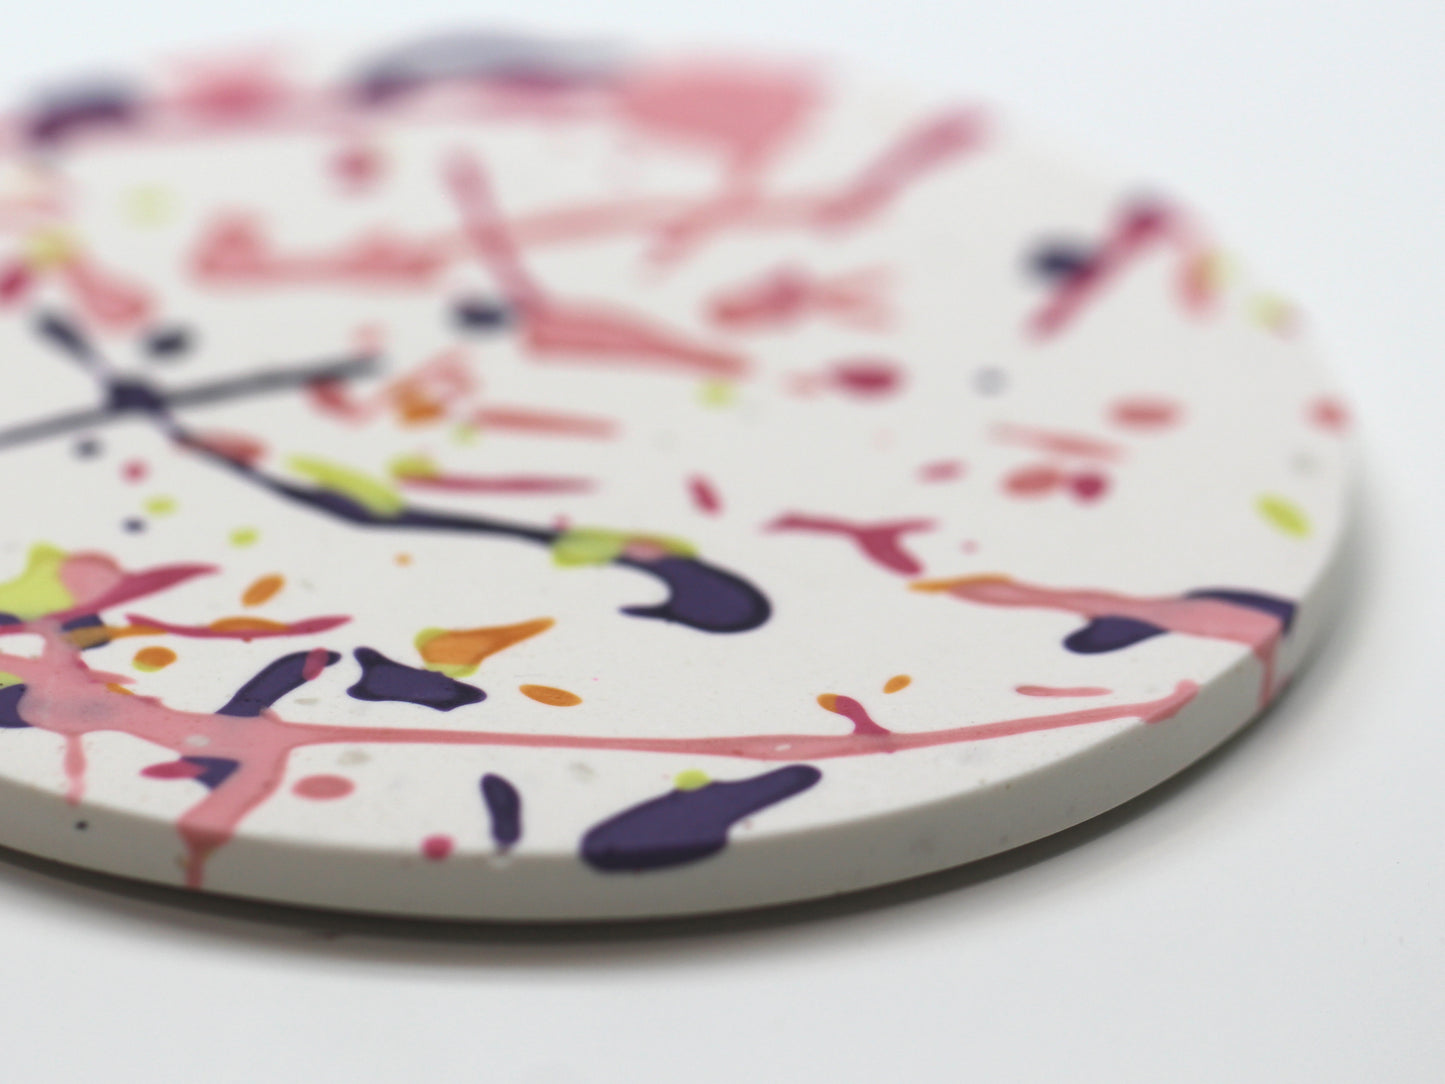 Set of 4 coasters with funky splashes